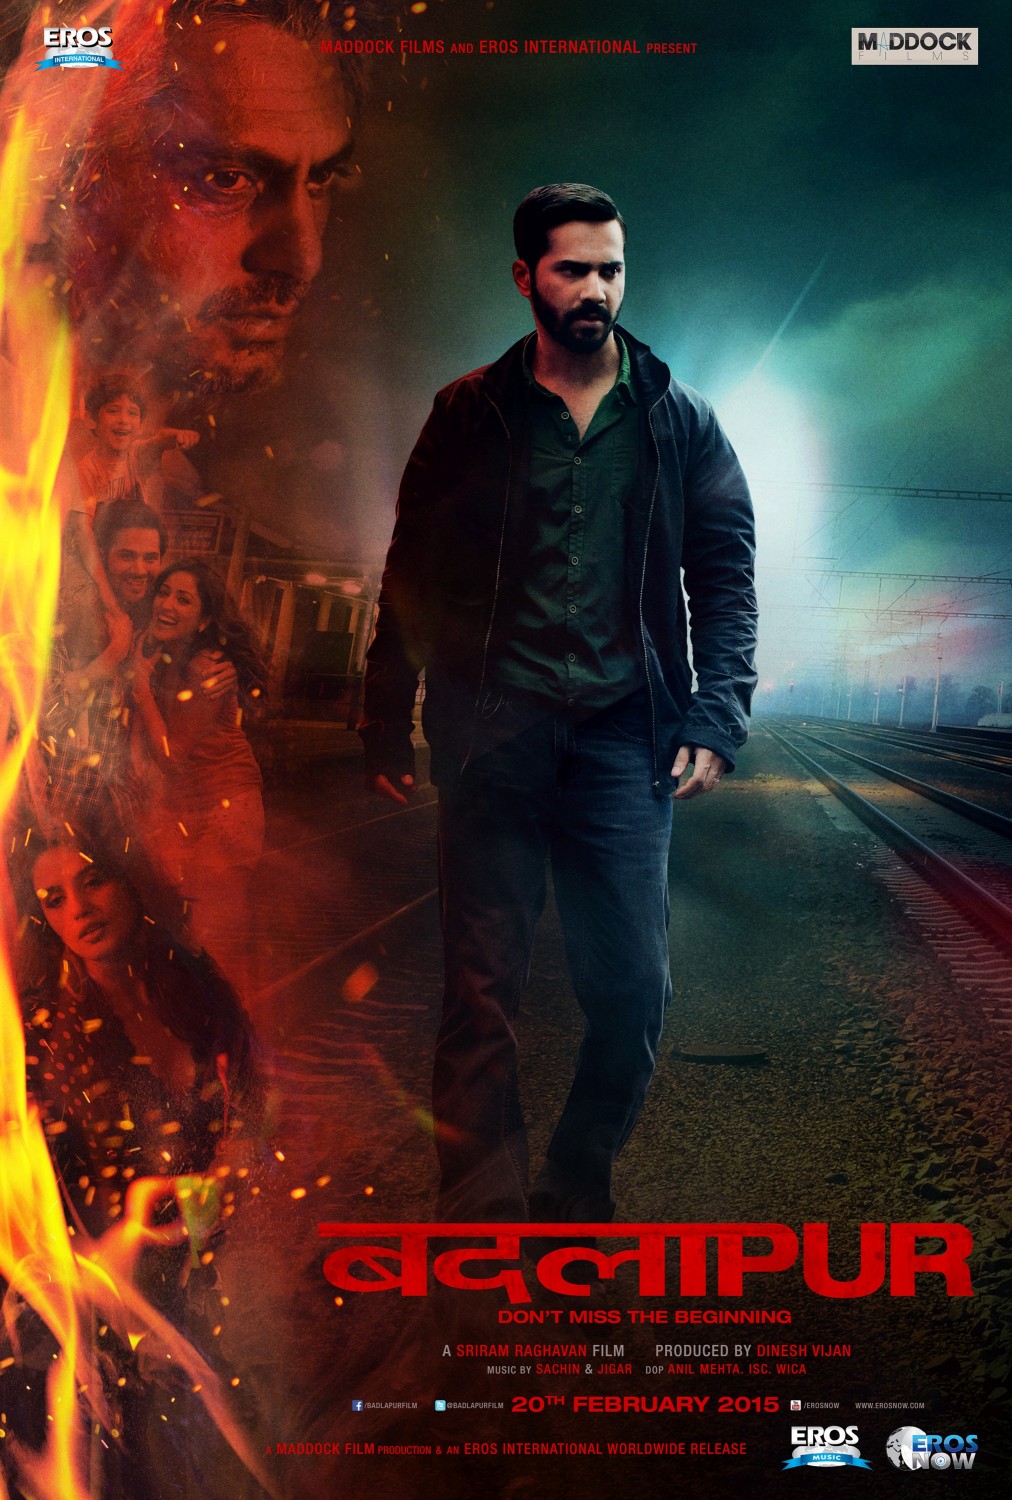 Extra Large Movie Poster Image for Badlapur (#7 of 7)